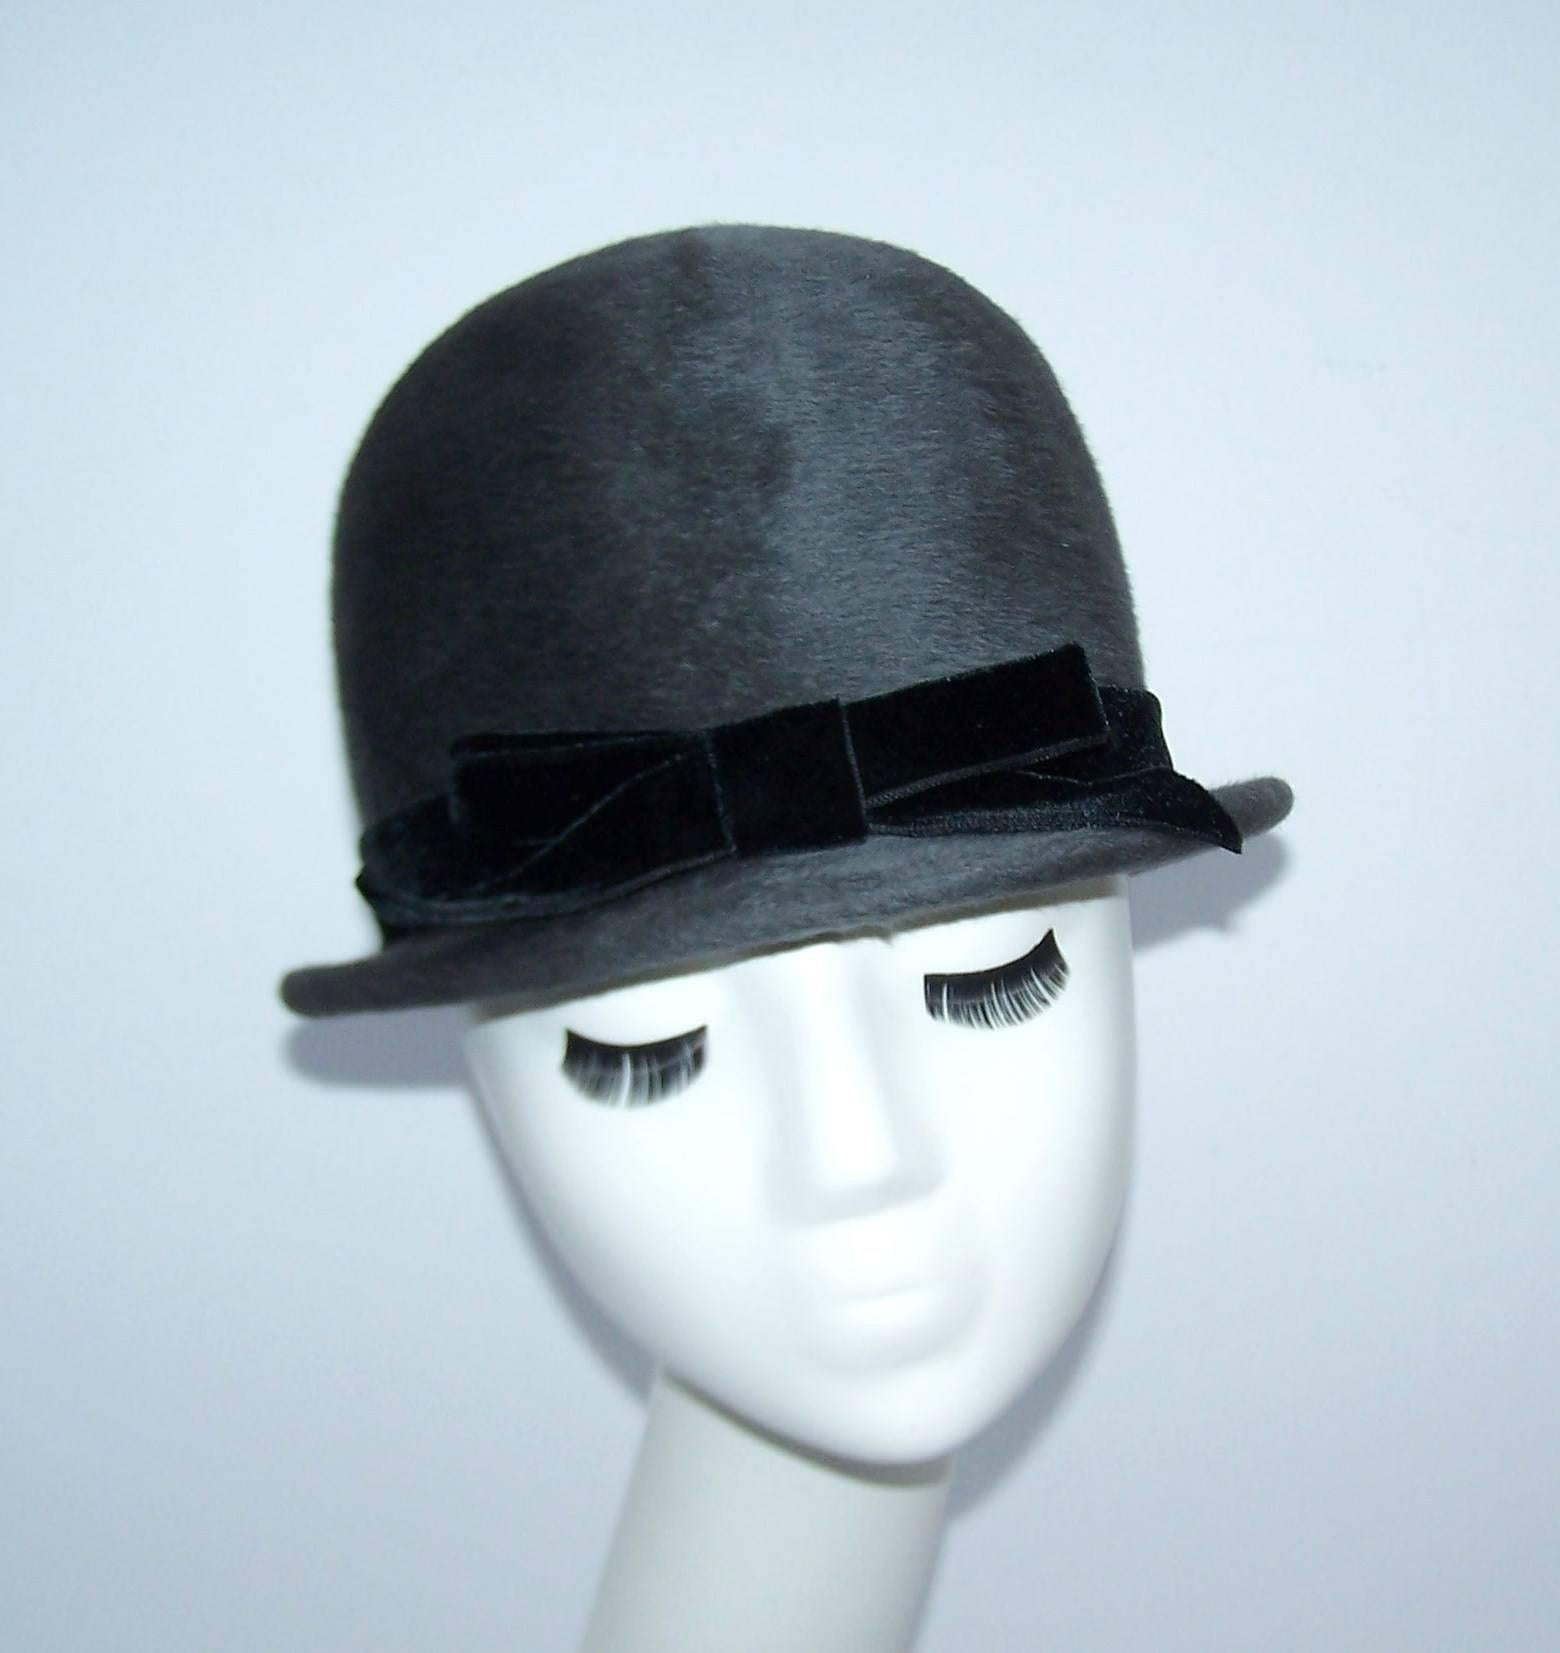 This adorable 1960's charcoal gray wool hat is reminiscent of the helmet worn by London bobbies...with a definitive feminine twist, of course!  The quality Italian made body is adorned with a black velvet bow.  Add a military inspired jacket to